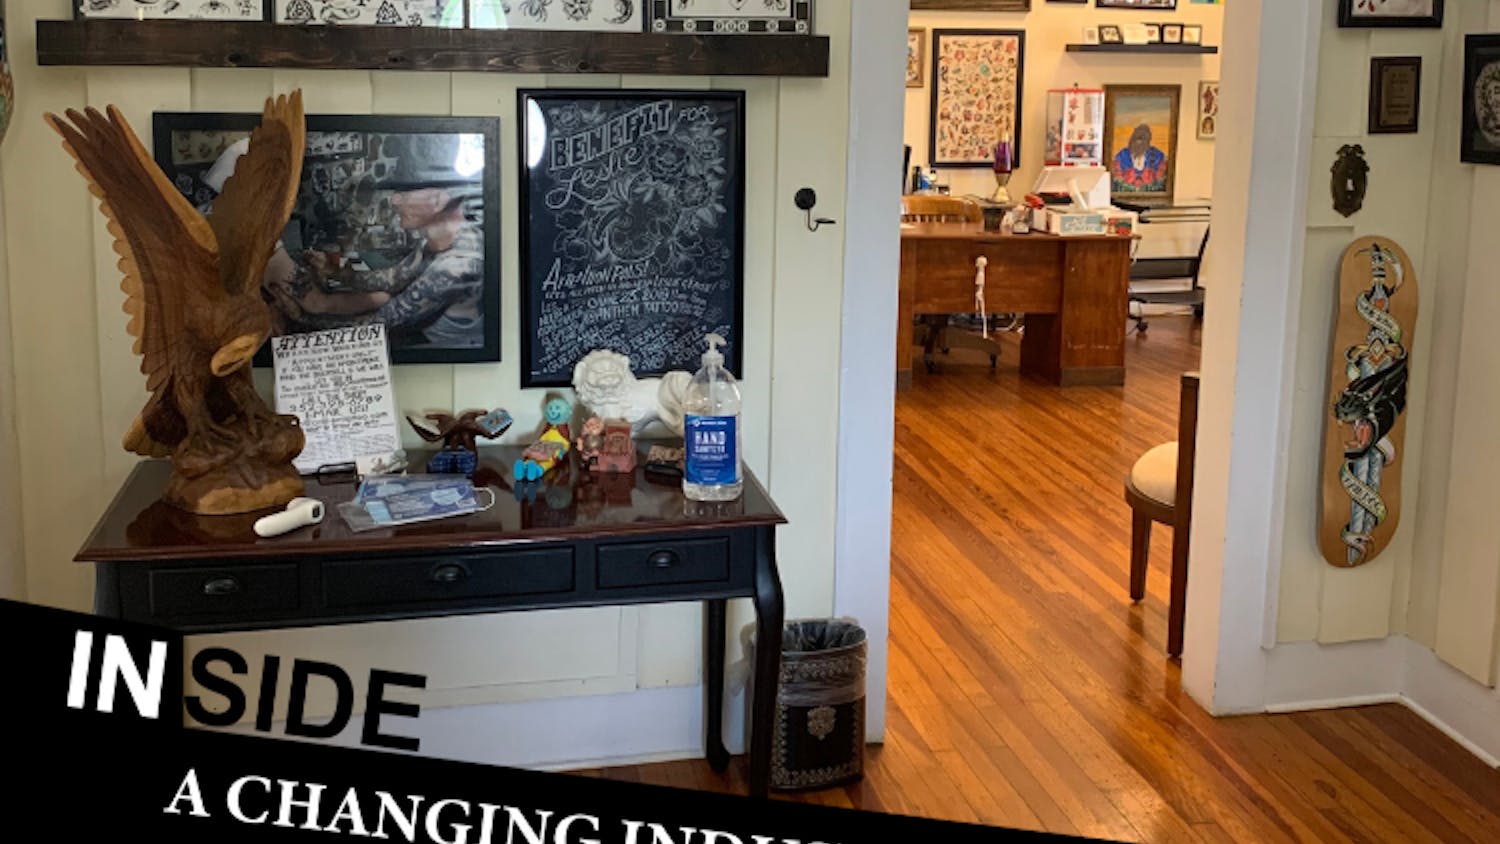 Guests at Anthem Tattoo Parlor are welcomed by a sign designating safe protocols, masks and a digital thermometer when they enter the door for their appointments.